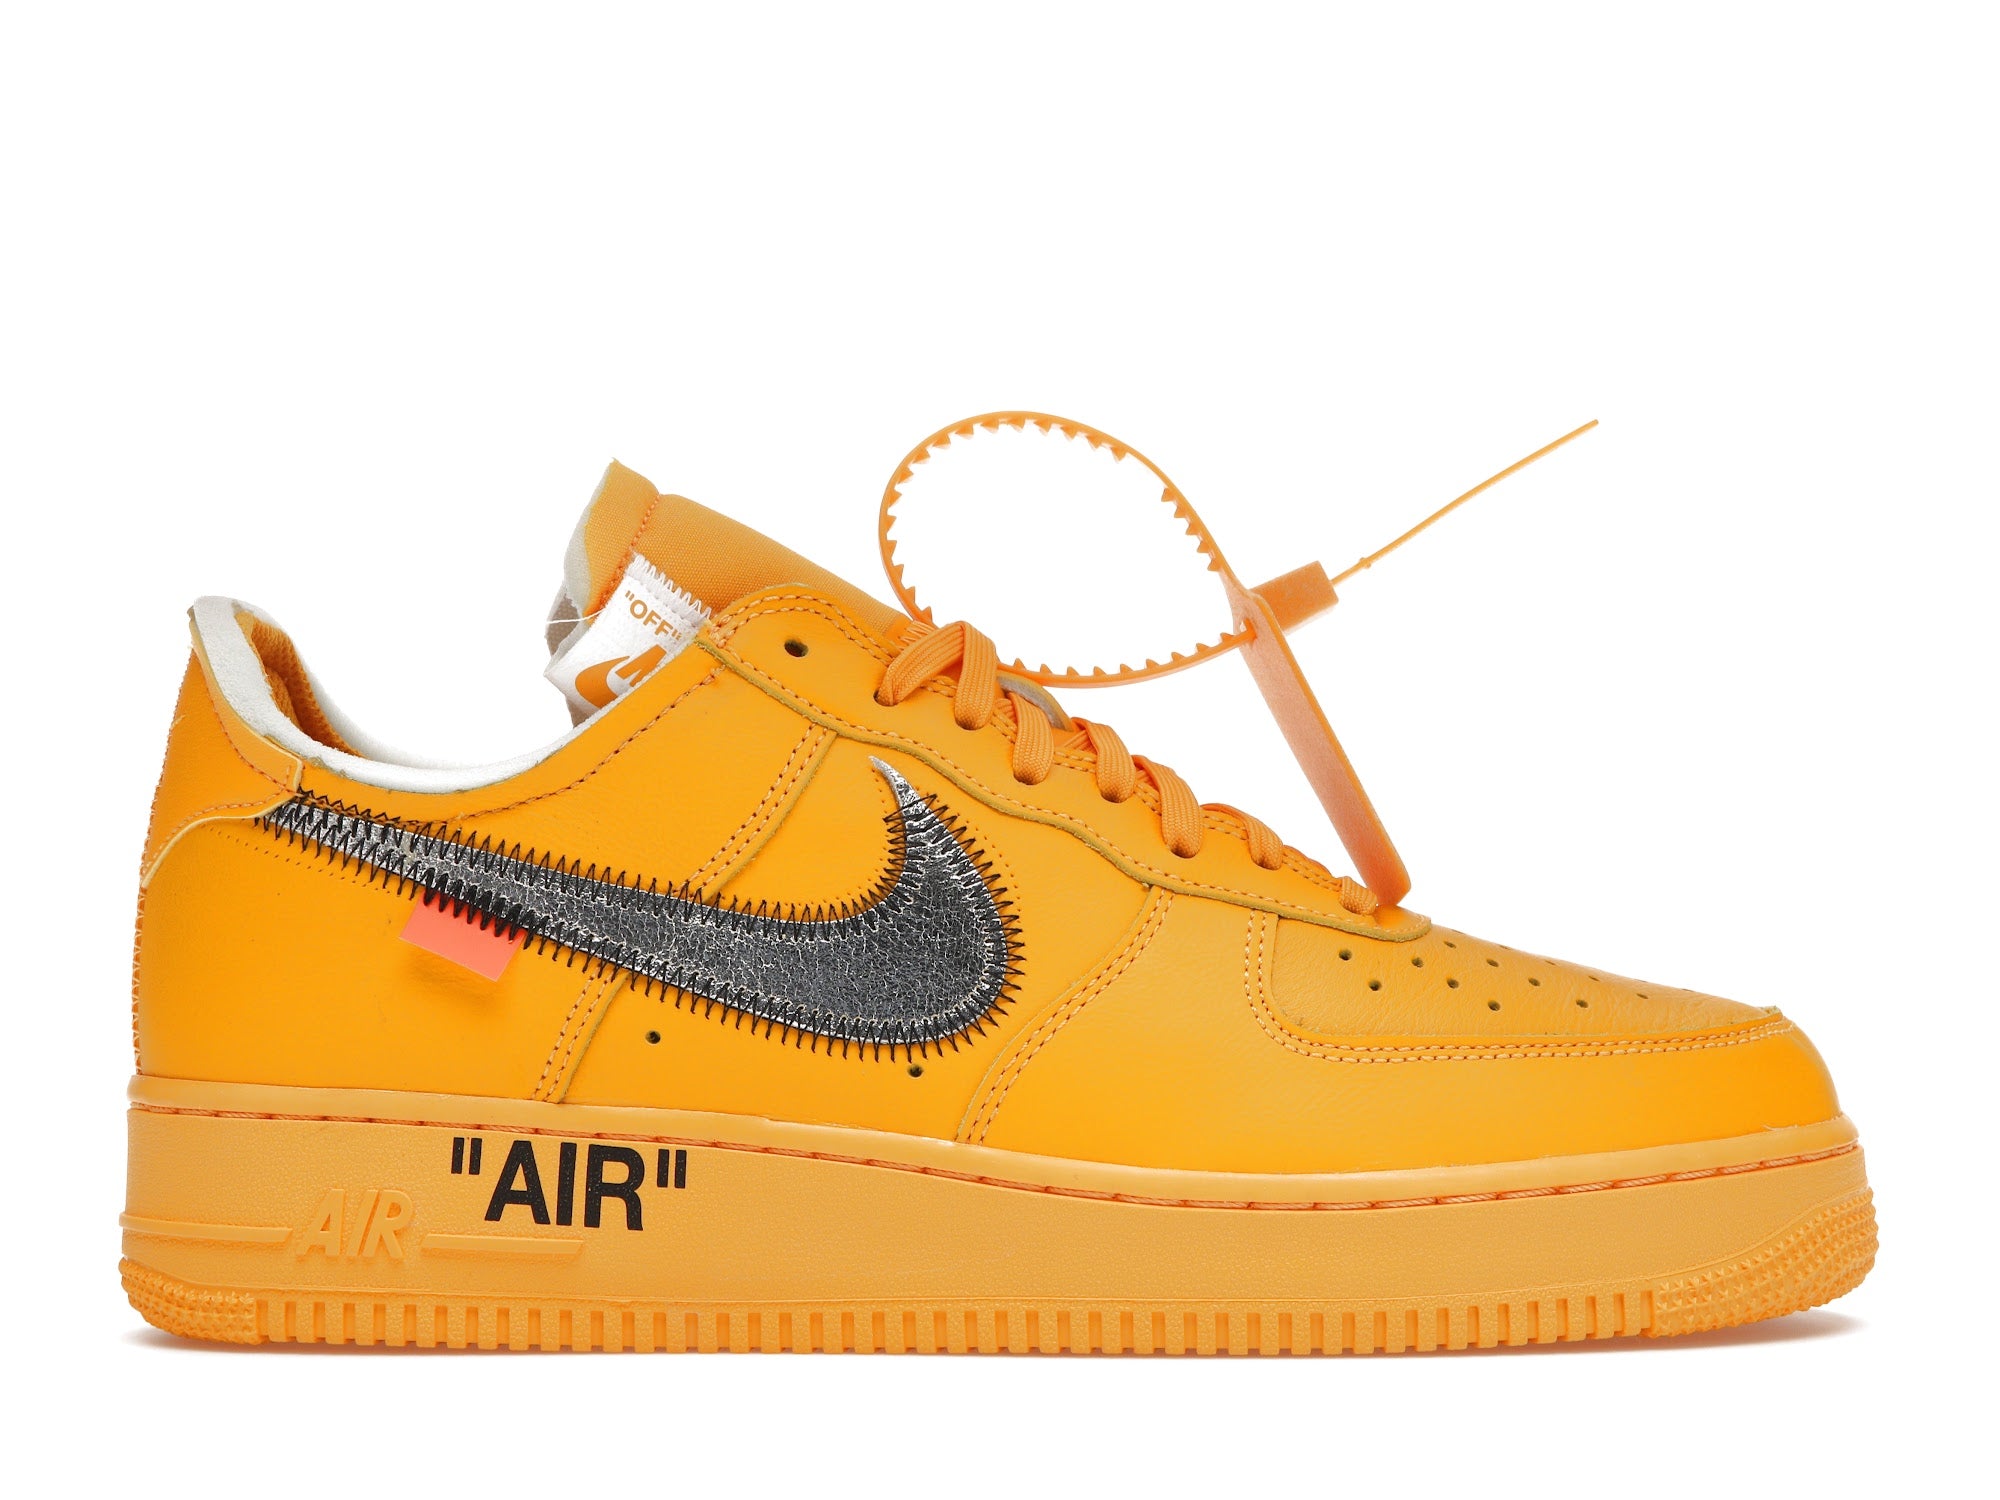 Nike Air Force 1 Low OFF-WHITE University Gold Metallic Silver for Sale, Authenticity Guaranteed